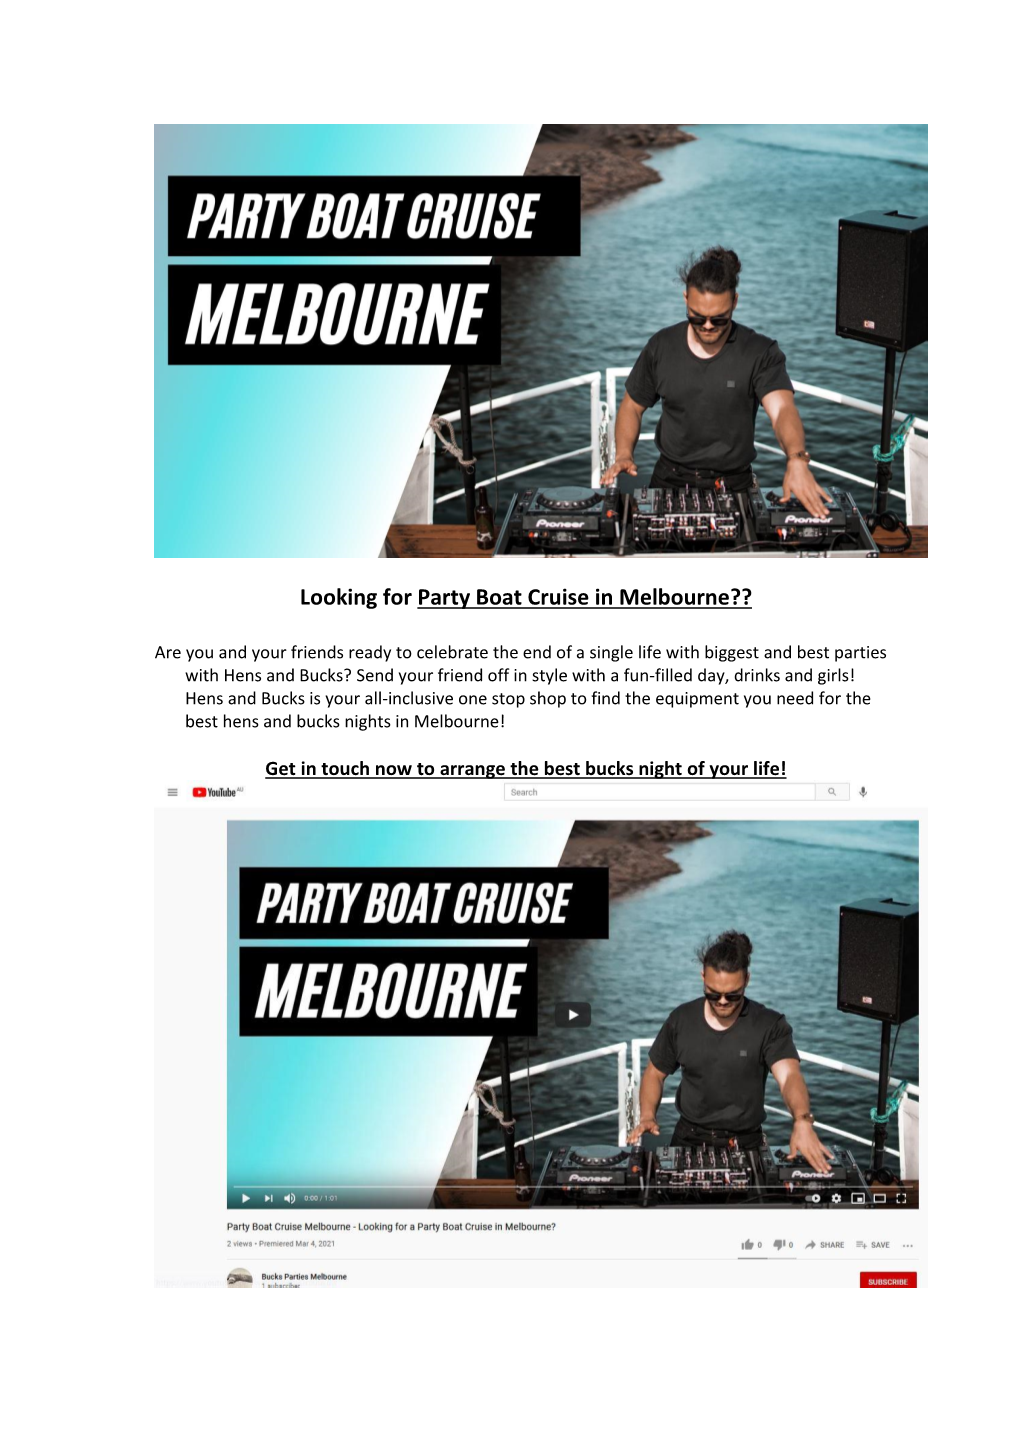 Looking for Party Boat Cruise in Melbourne??